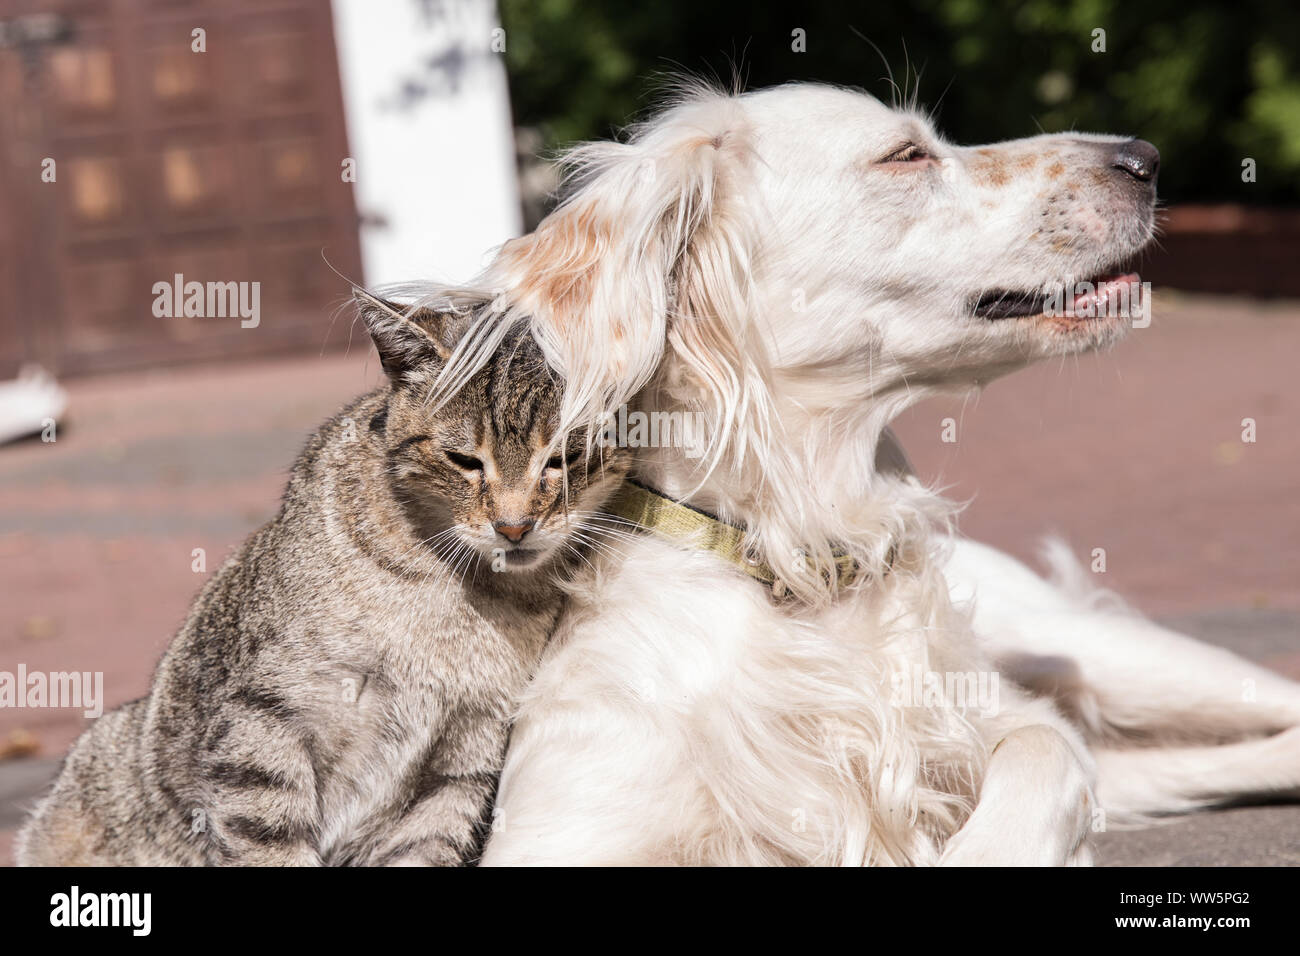 dog and cat playing together Stock Photo